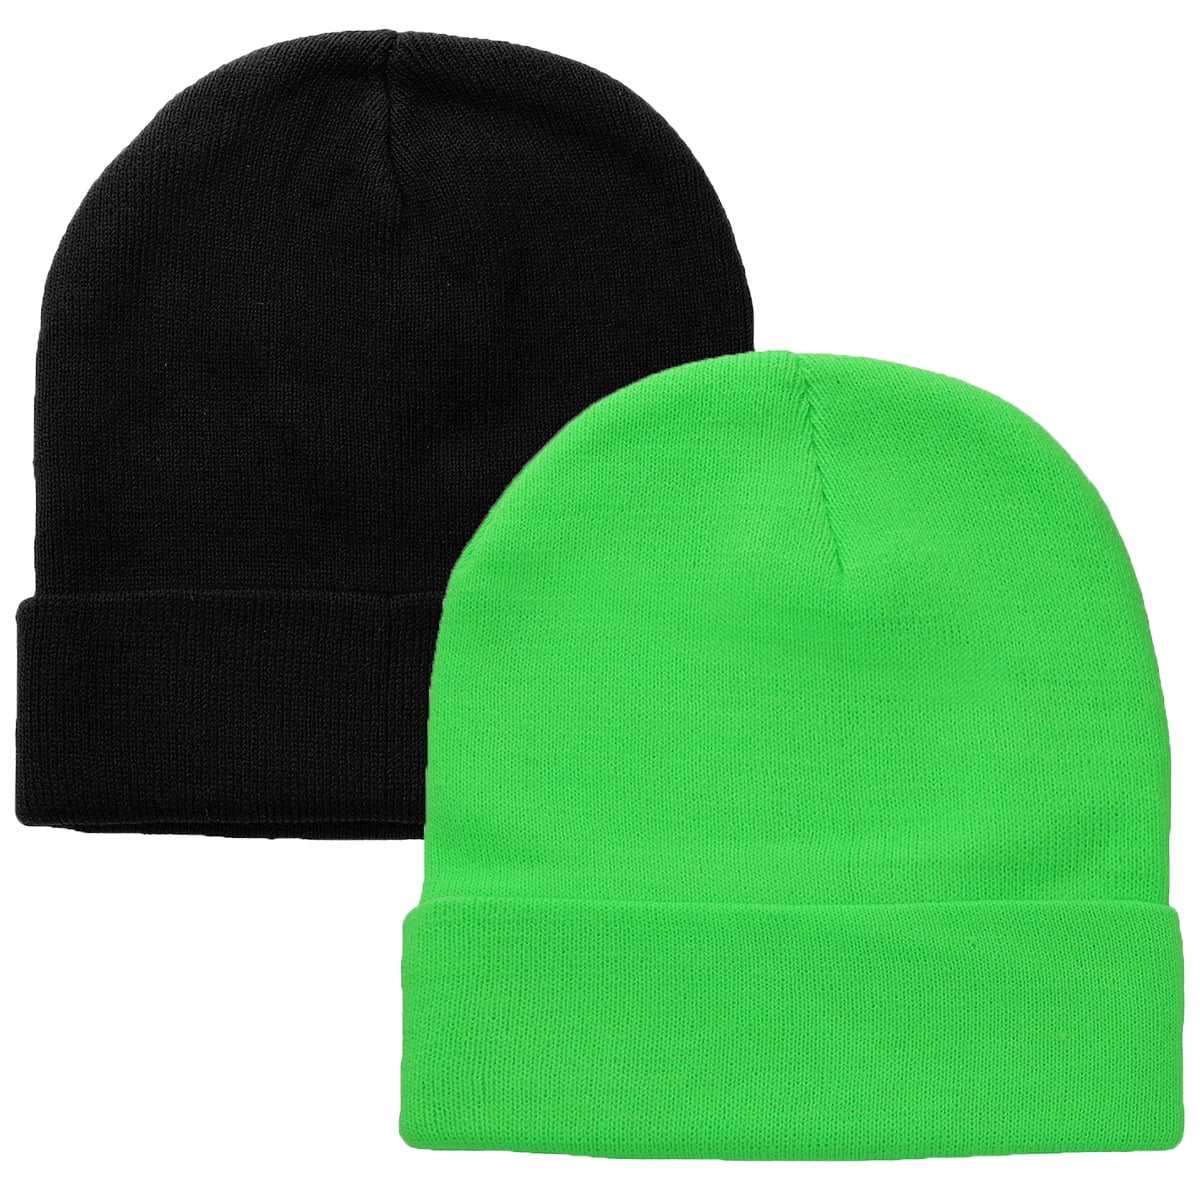 Men's Women Plain Beanie Cap Cable Knit Stretch Solid Ski Thermal Winter Hats 